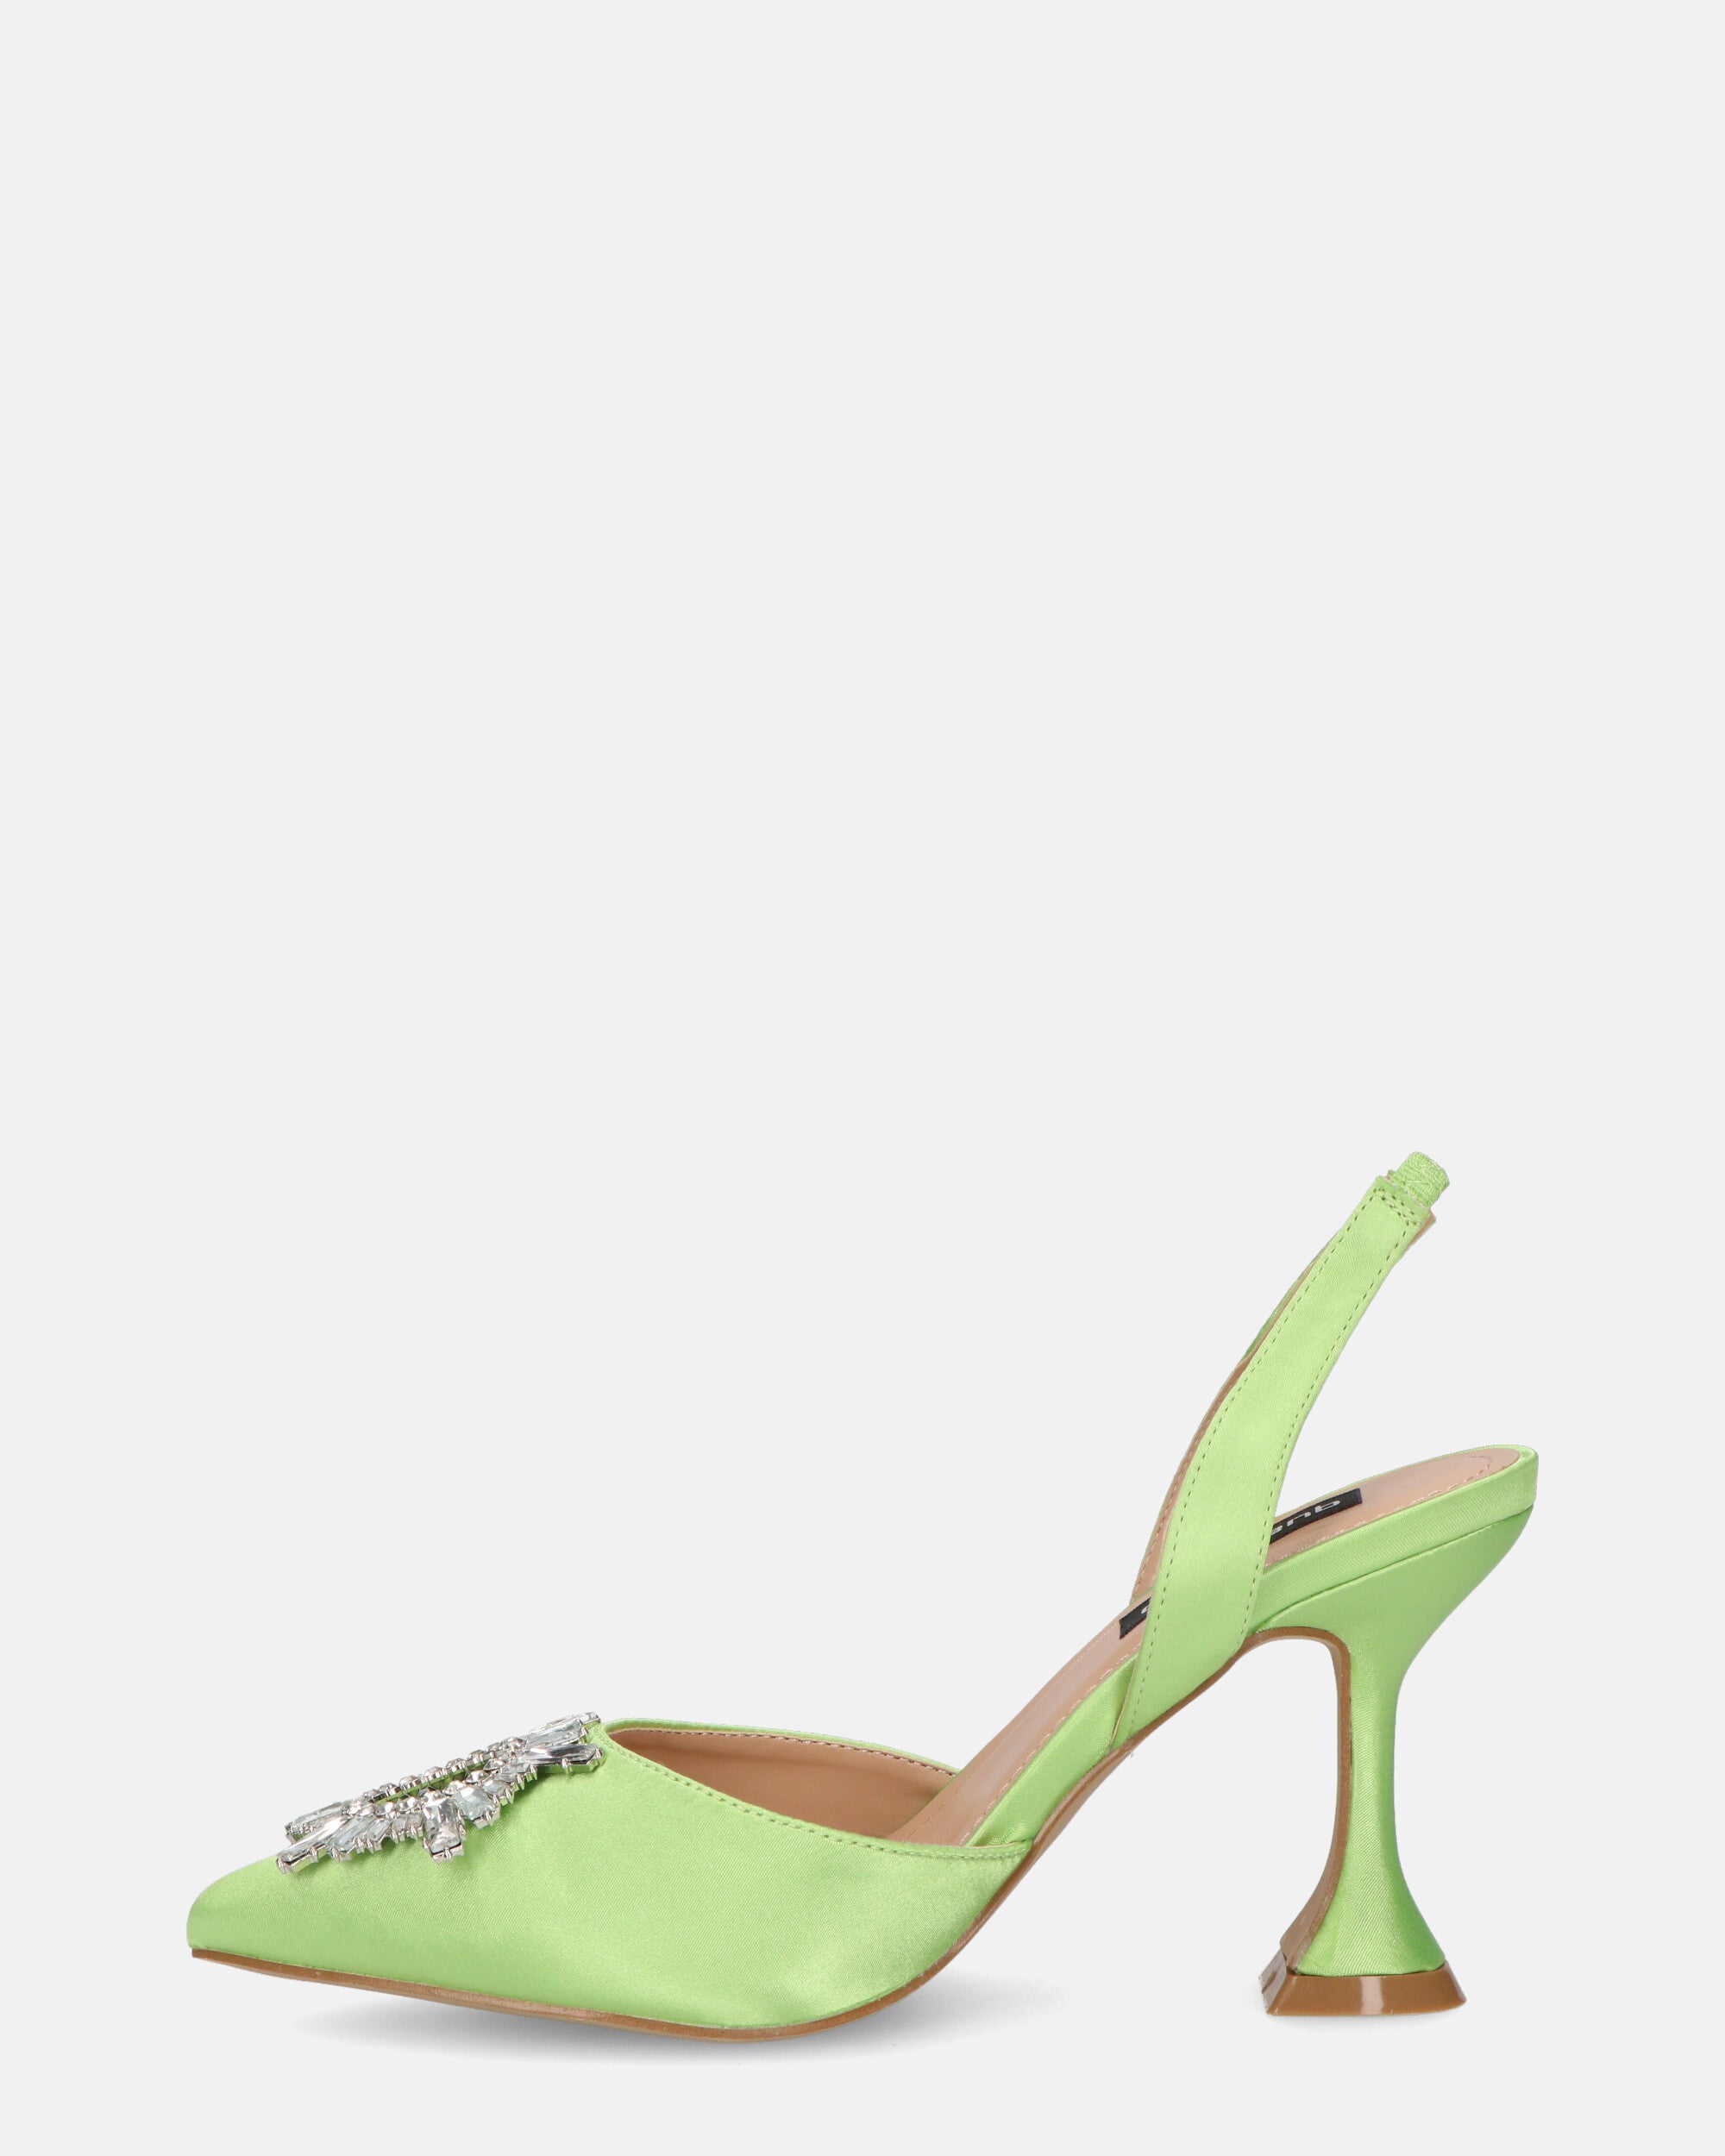 MAGDA - heeled shoe in apple green satin with decorative gems